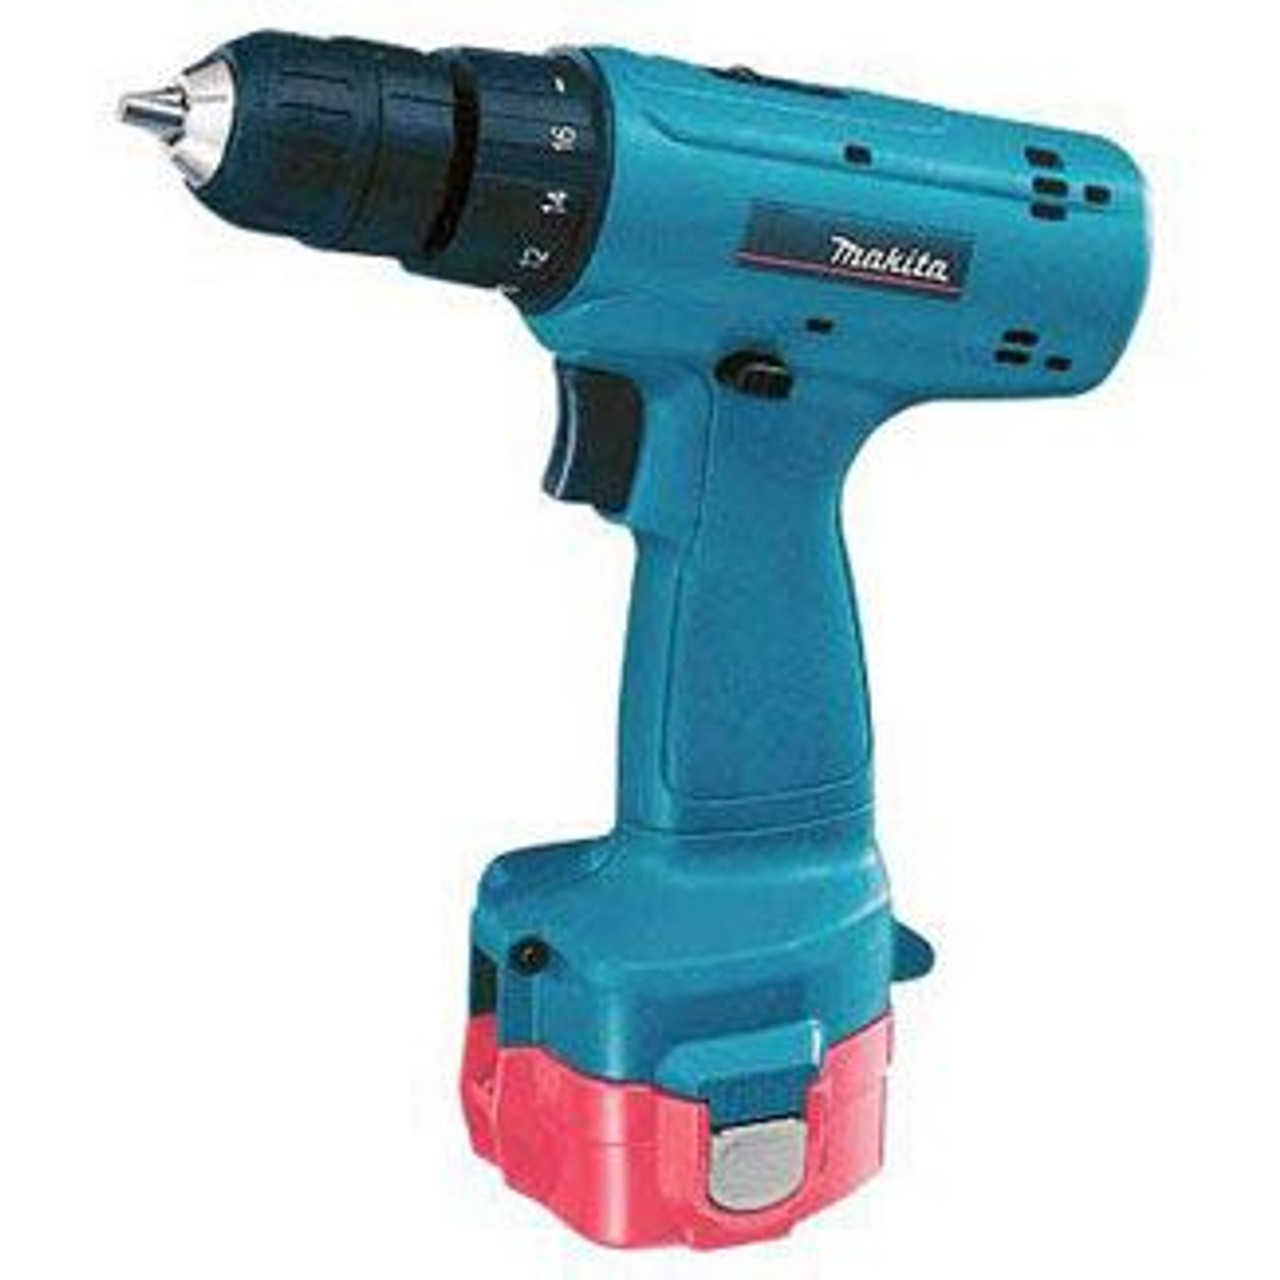 Makita 12 Volt 3/8 inch Drill with Two Batteries